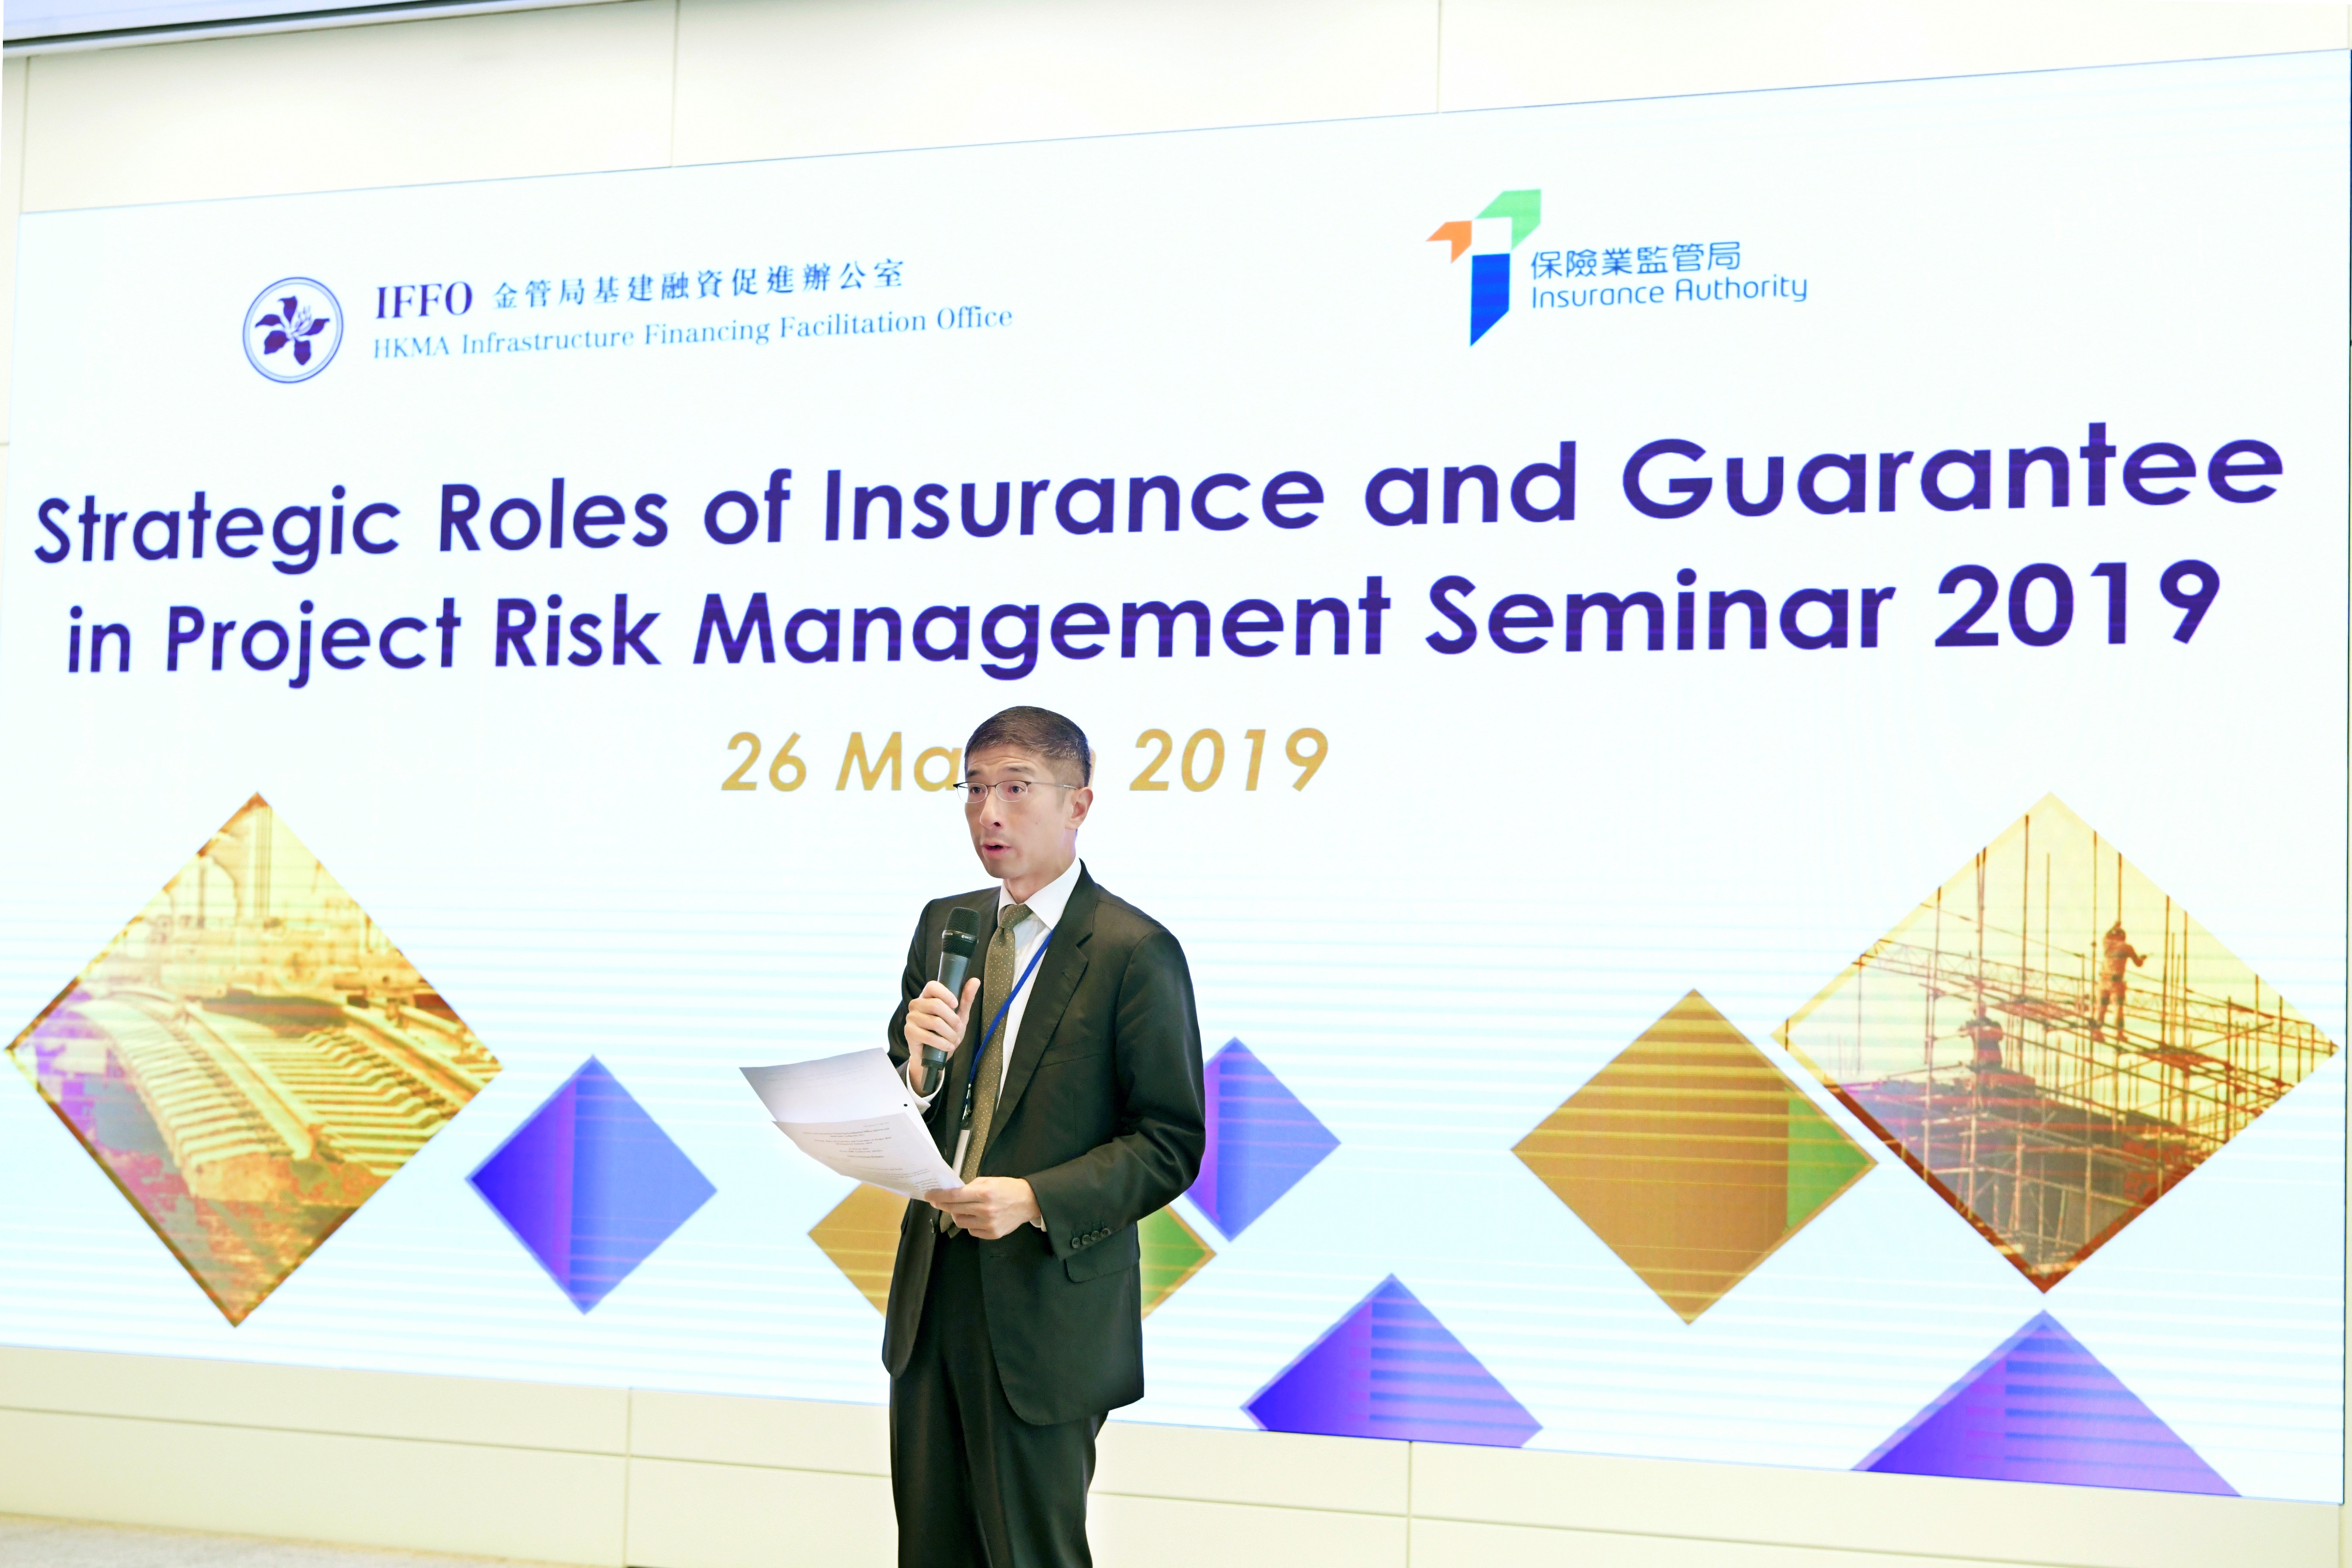 Mr Vincent Lee, Executive Director (External) of the HKMA and Deputy Director of IFFO, gives welcome remarks and talks about the importance of risk mitigation in infrastructure investments and financing.